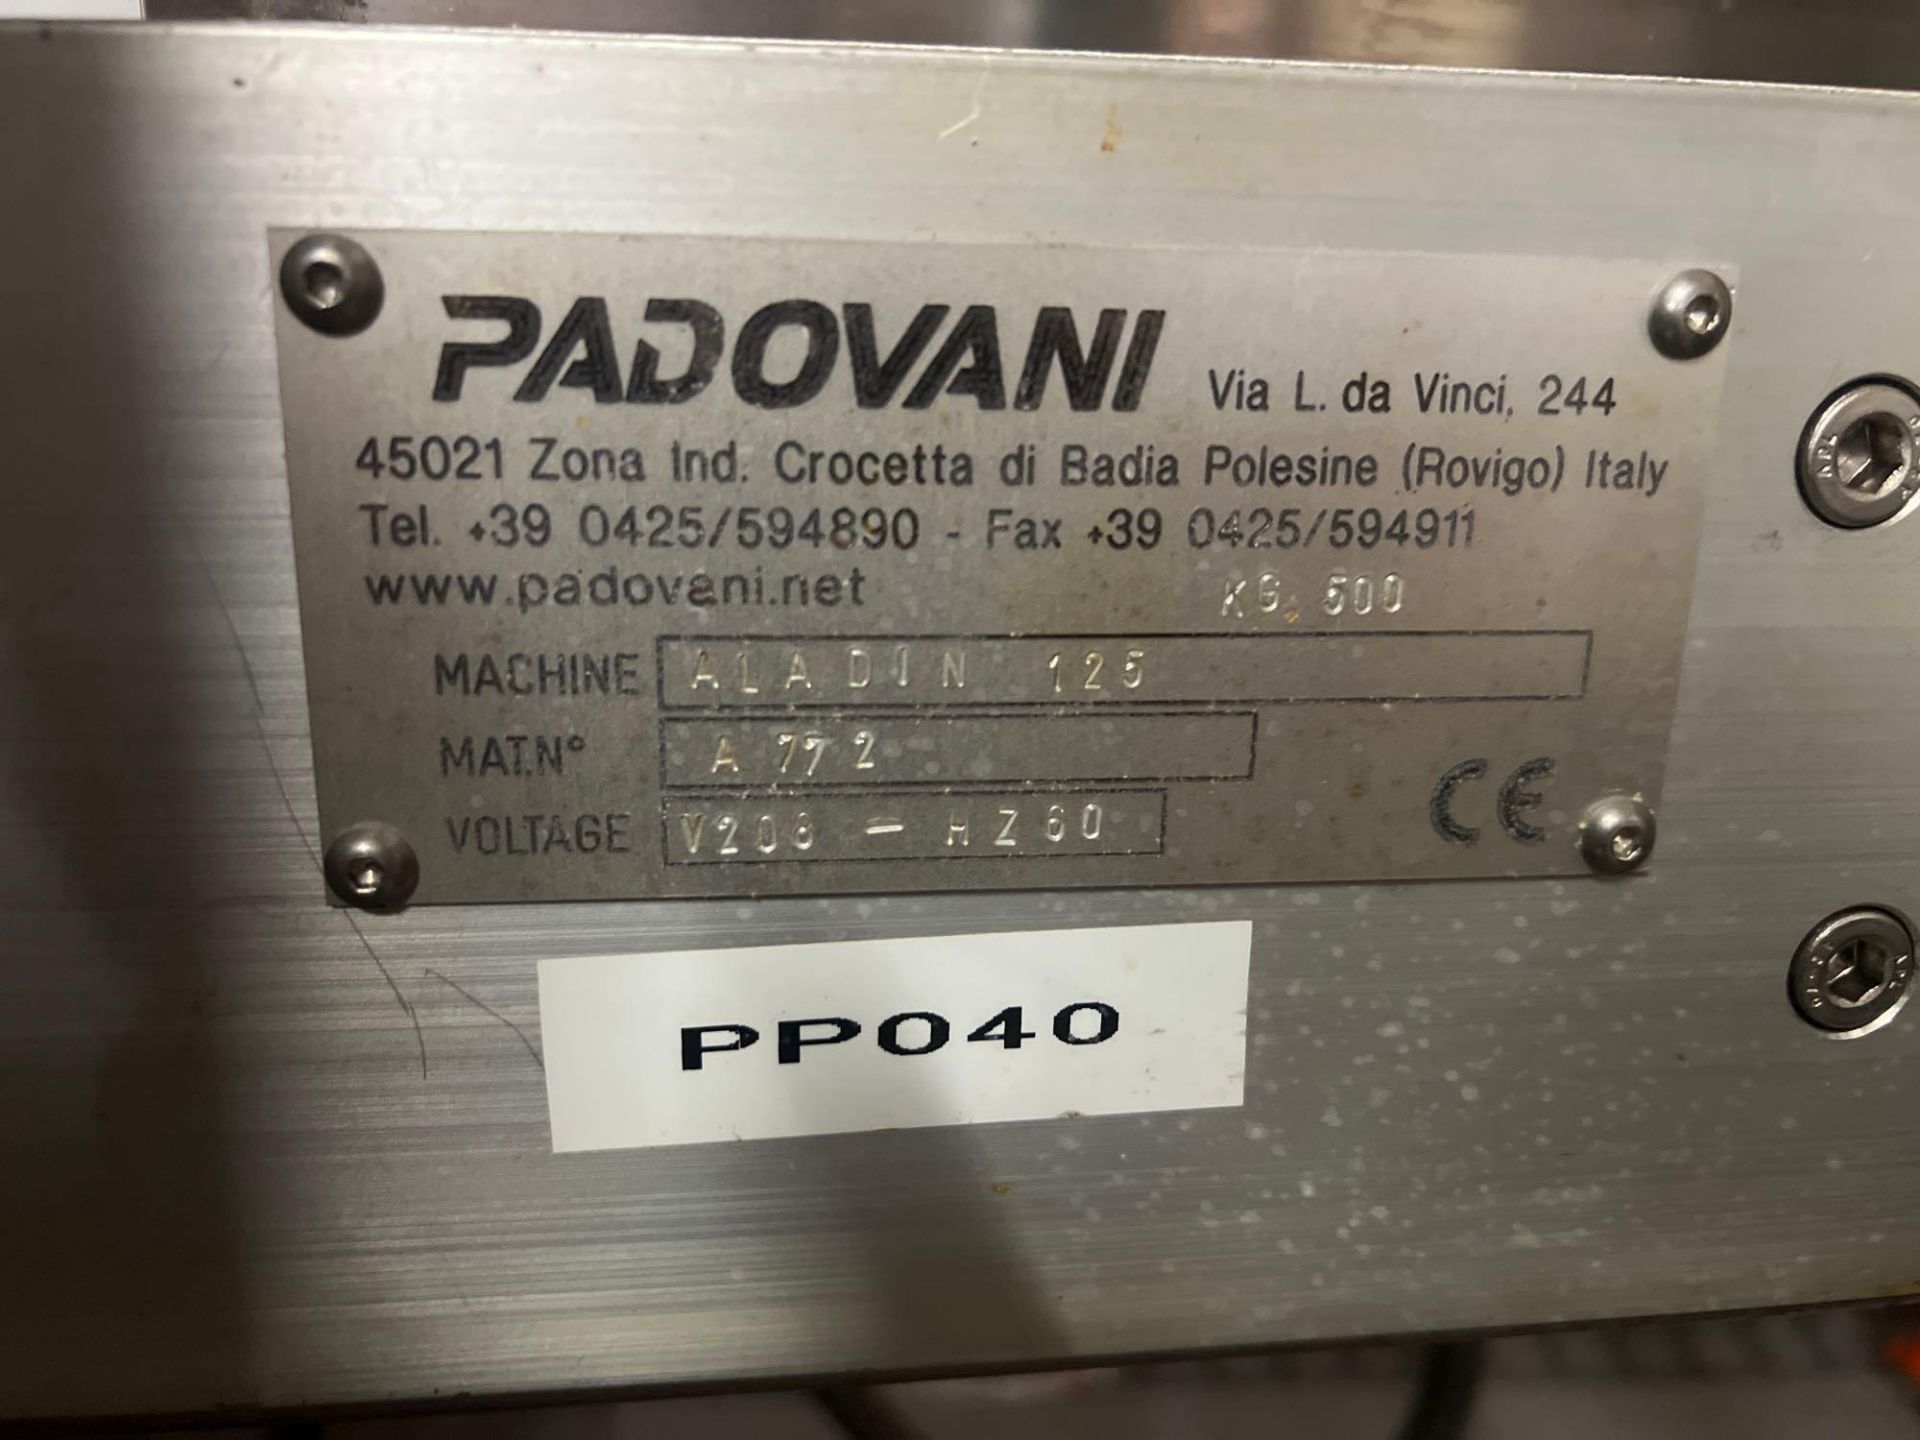 Padovani Aladin 125 Stainless Steel Extruder - Image 8 of 14